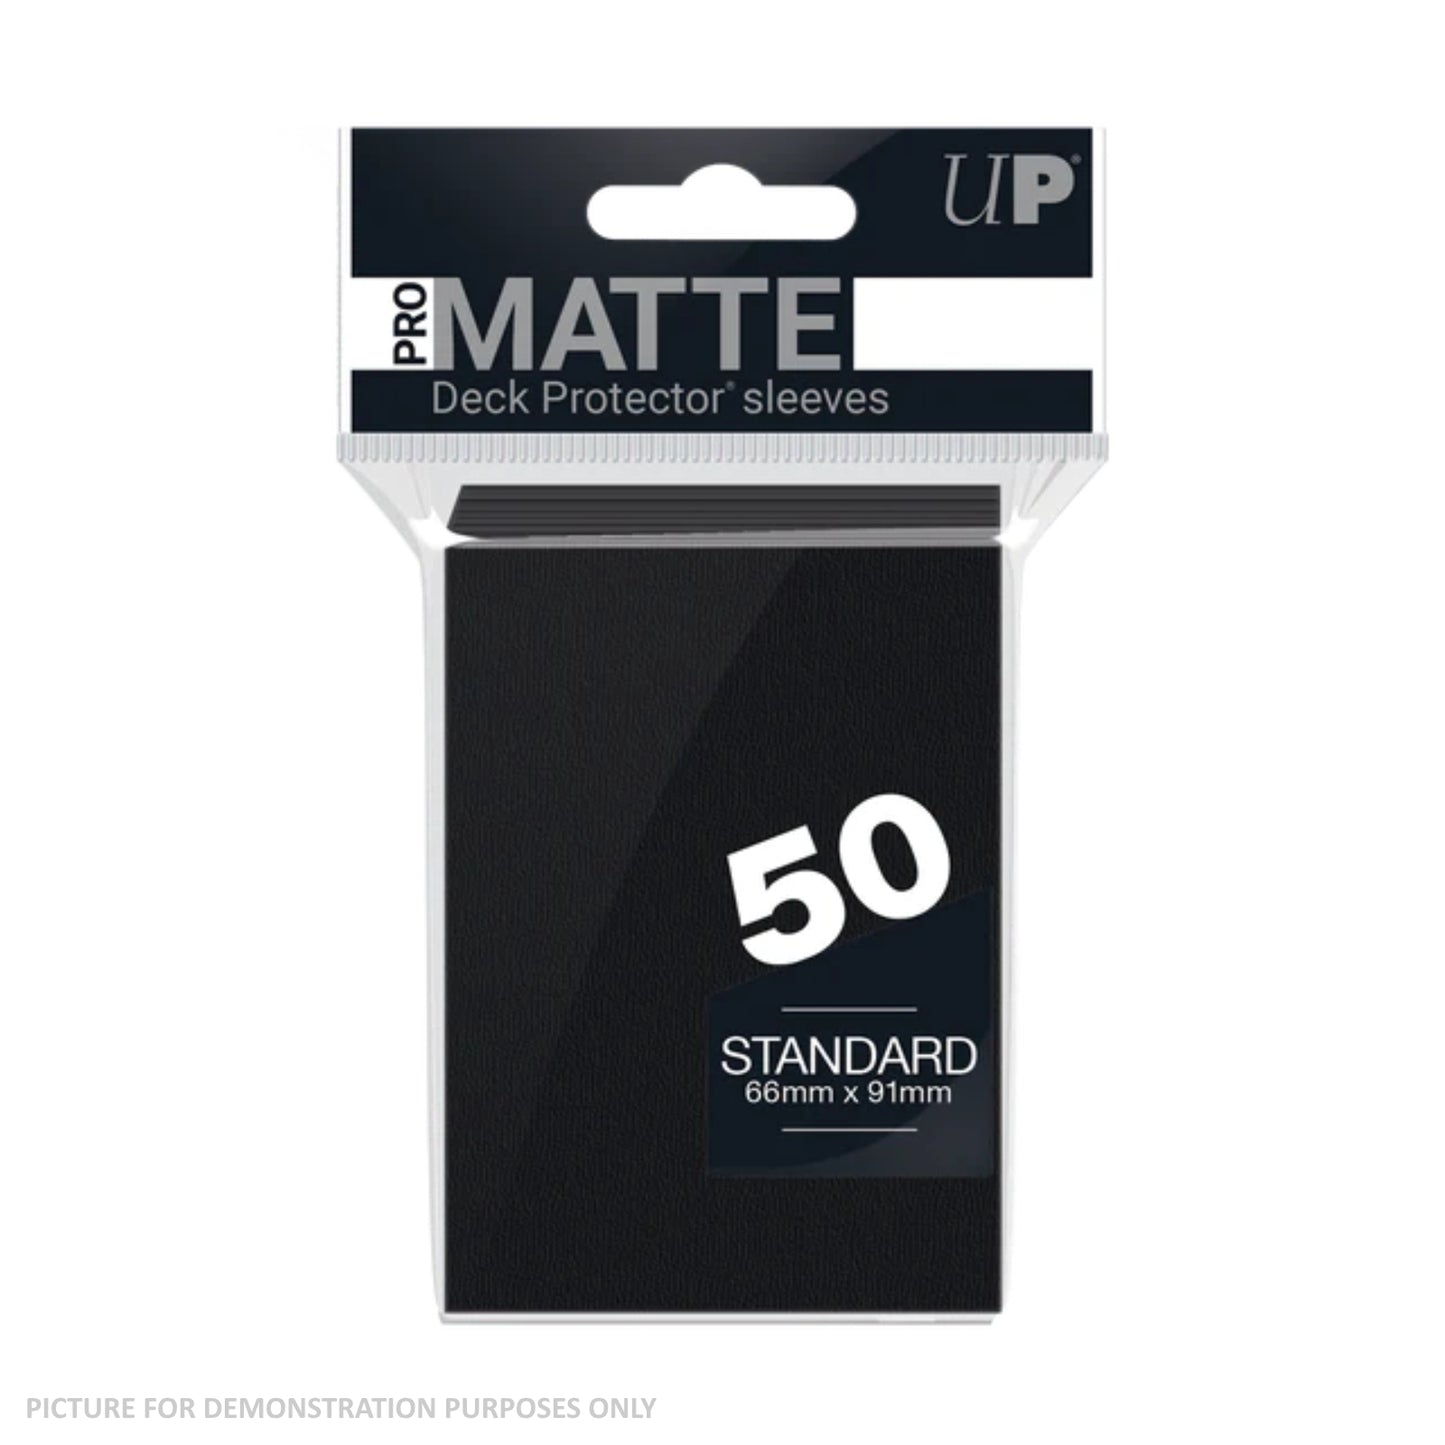 Ultra Pro Deck Protector ProMatte BLACK Sleeves 50ct